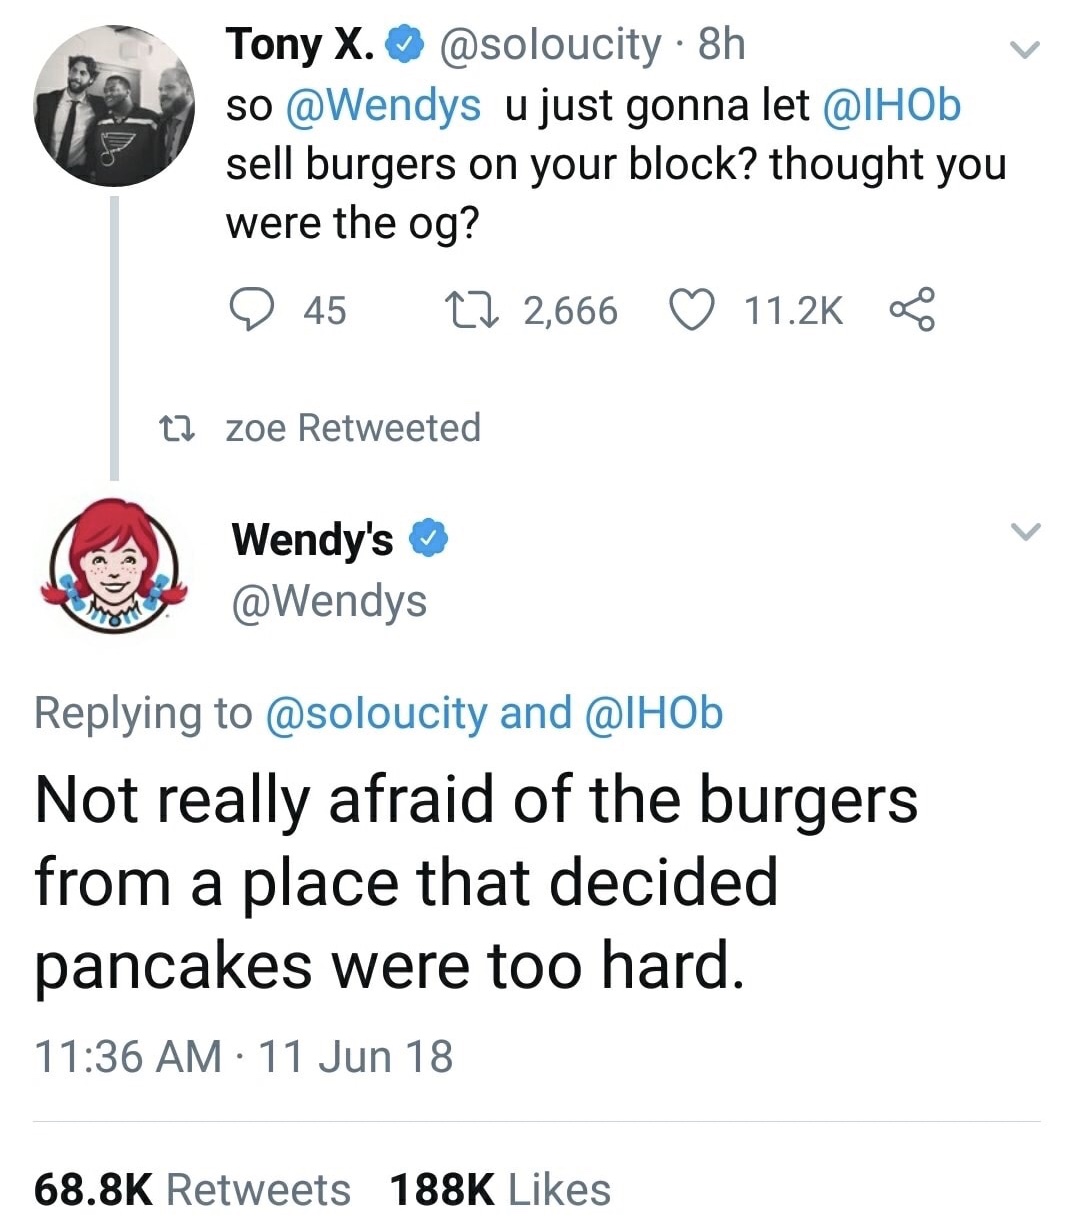 ihob roast - Tony X. 8h so u just gonna let sell burgers on your block? thought you were the og? O 45 Cz 2,666 22 zoe Retweeted Wendy's and Not really afraid of the burgers from a place that decided pancakes were too hard. 11 Jun 18